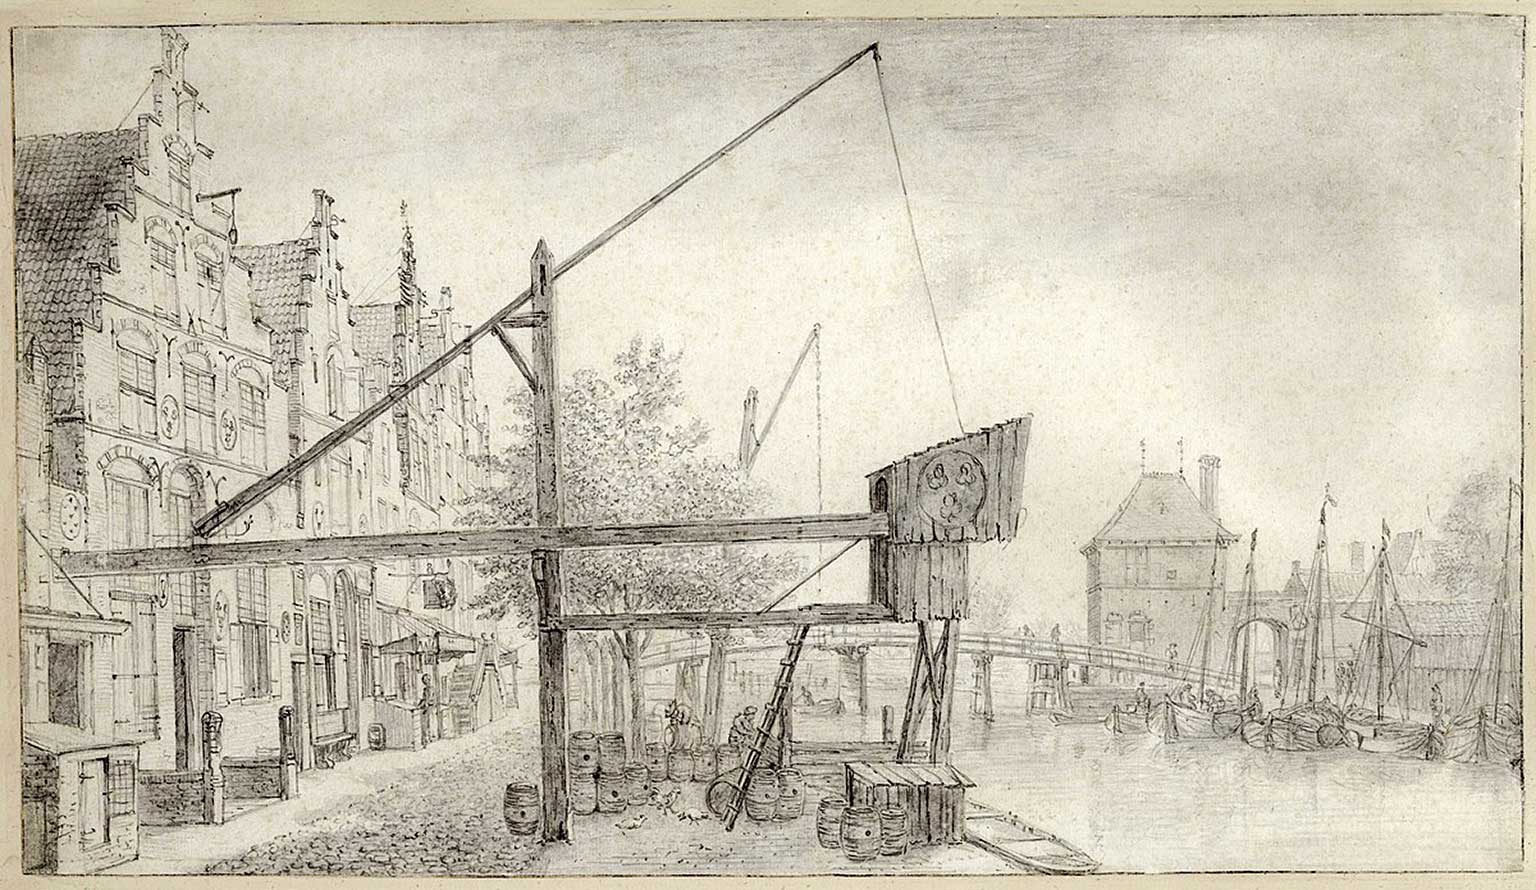 Beer pole in front of a brewery in Haarlem, drawing from 1660 by Anthonie Beerstraten